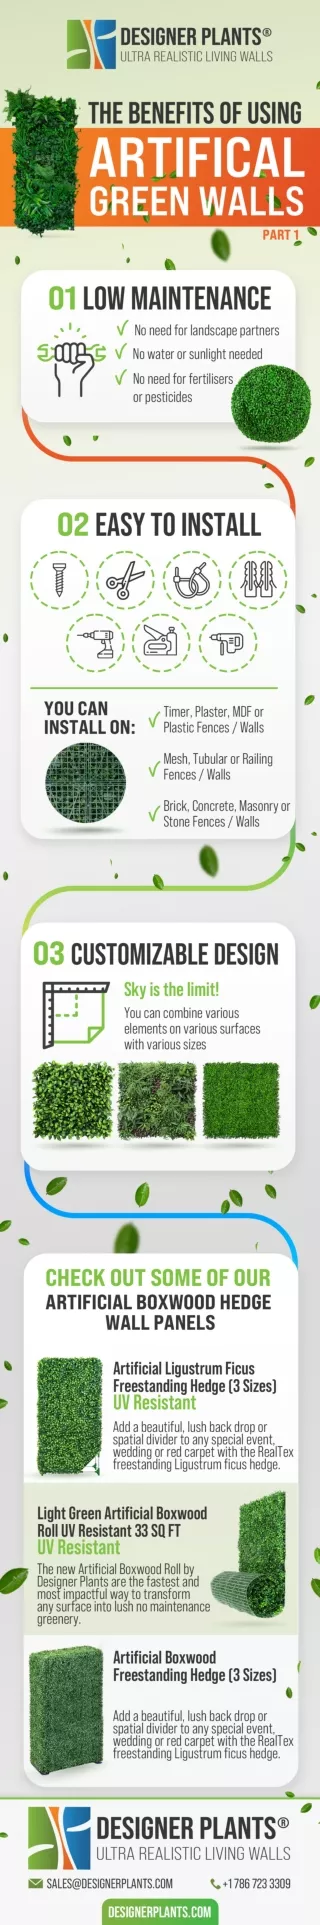 The Benefits of Using Artificial Green Walls - Designer Plants USA